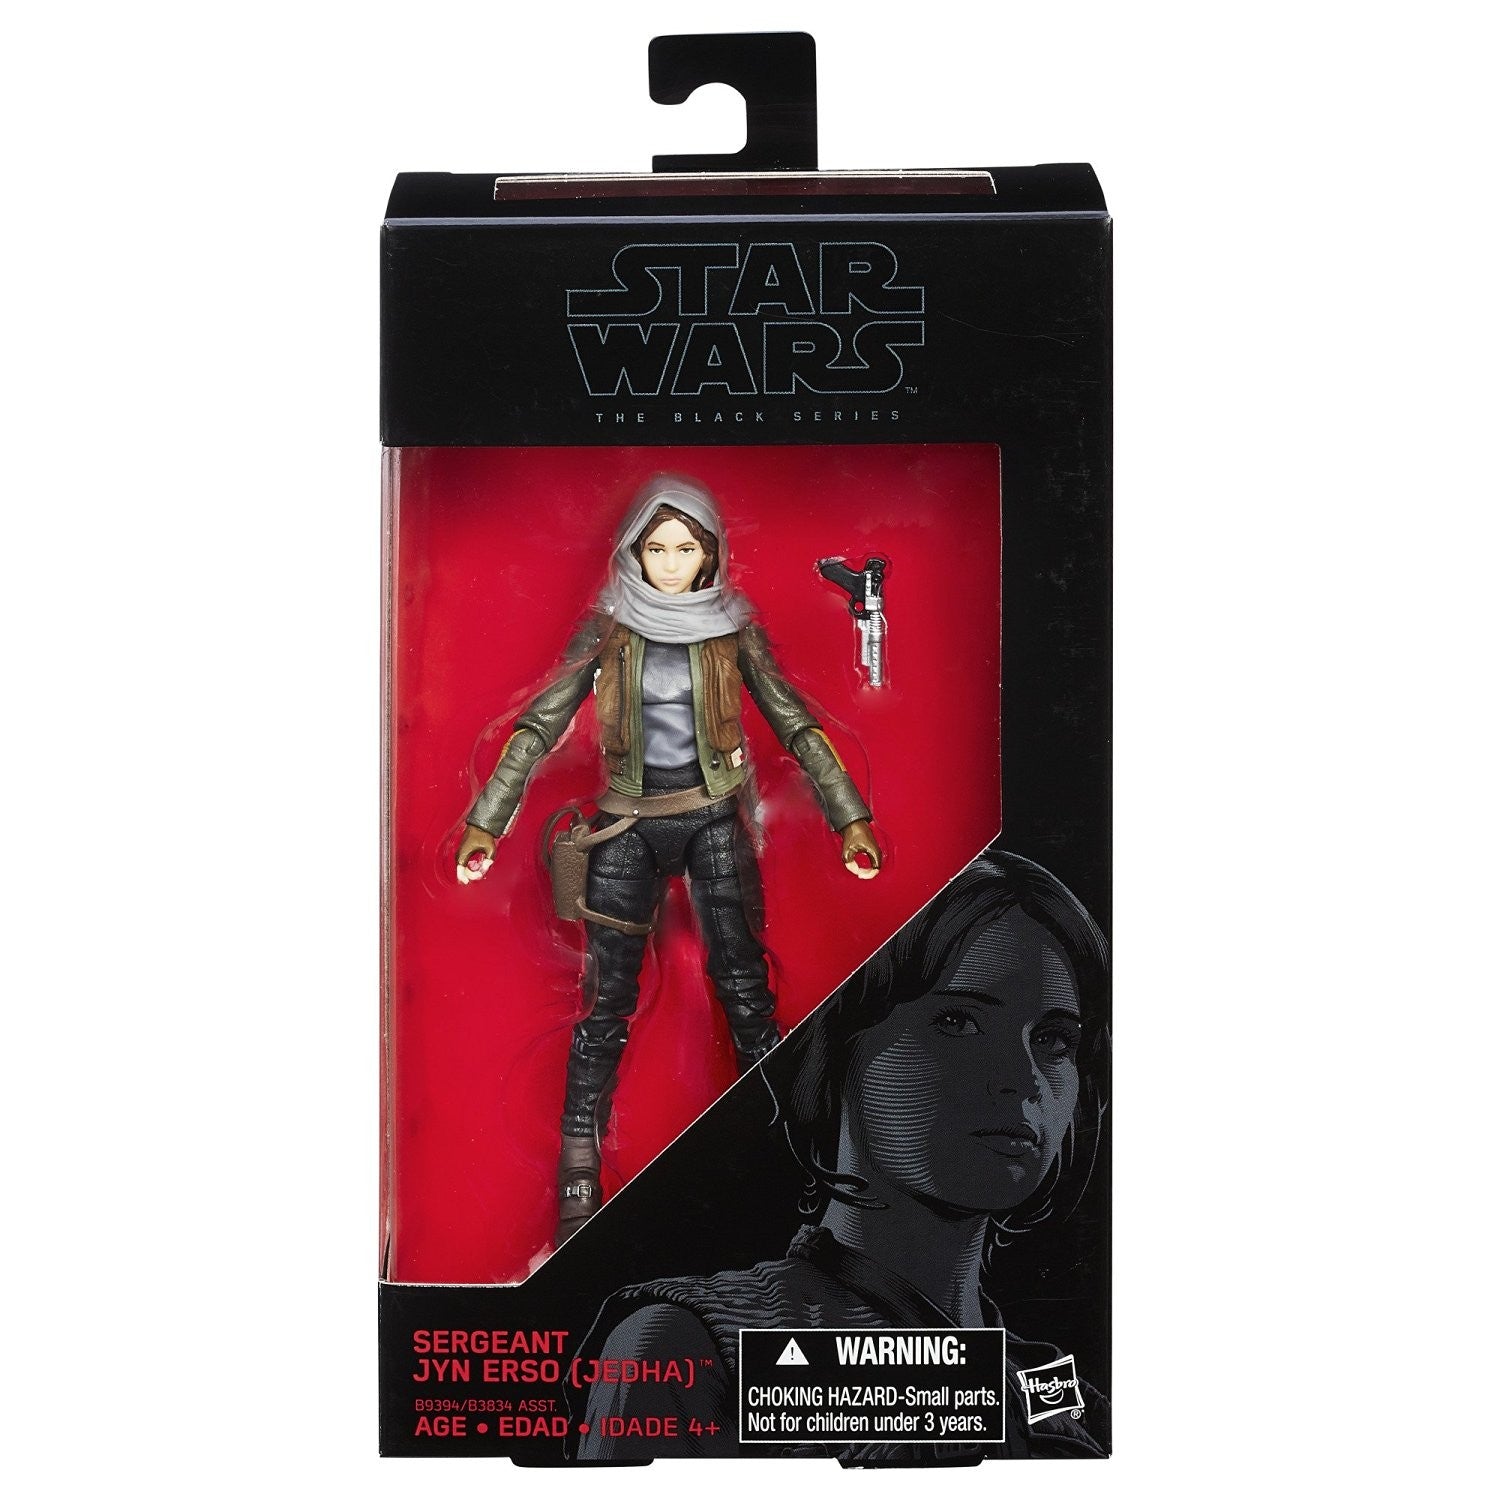 Star Wars Black Series 6" Sergeant Jyn Erso (Jedha) from Rogue One #22